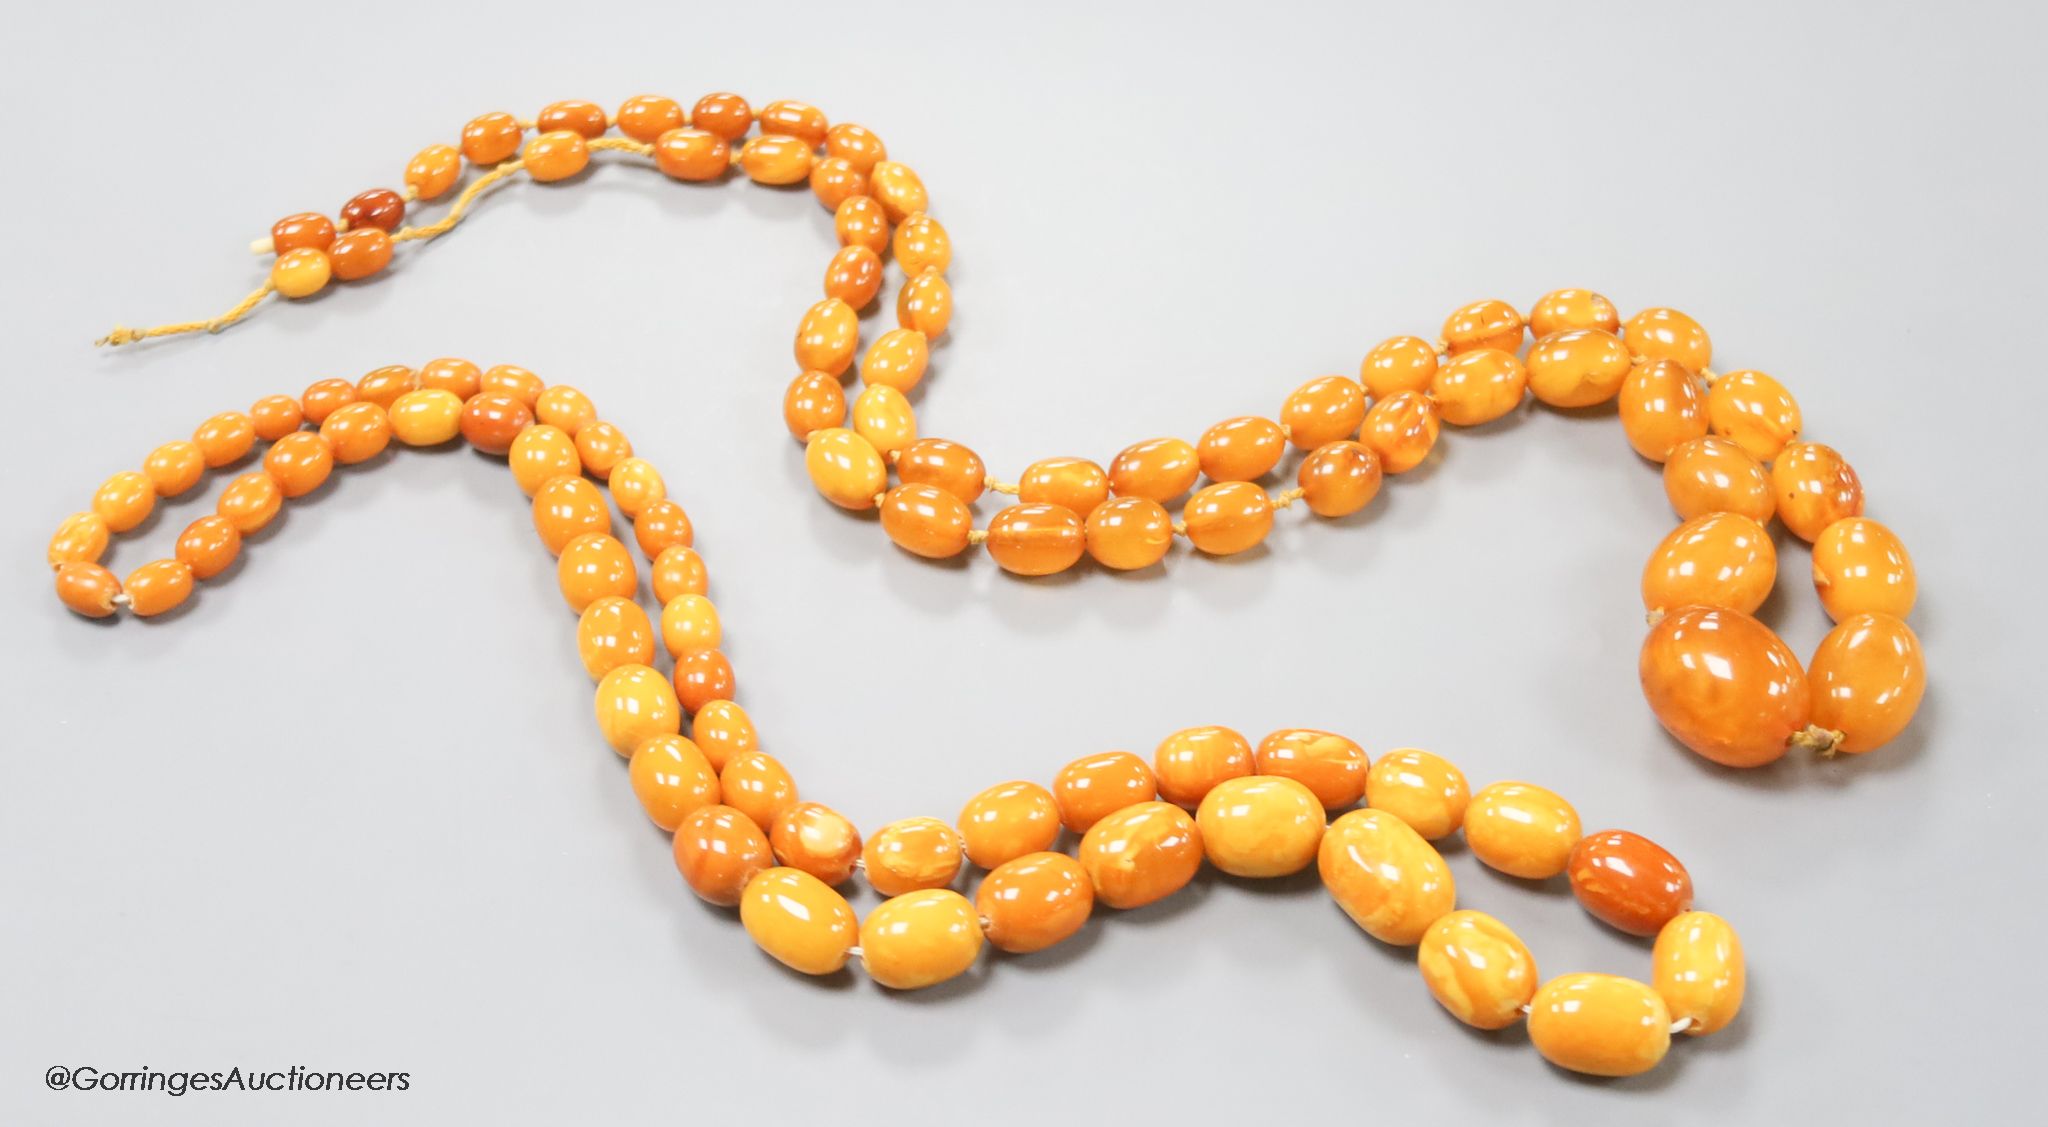 Two single strand graduated oval amber bead necklaces, 71cm, 61 grams & 89cm, 68 grams (beads missing from larger necklace)